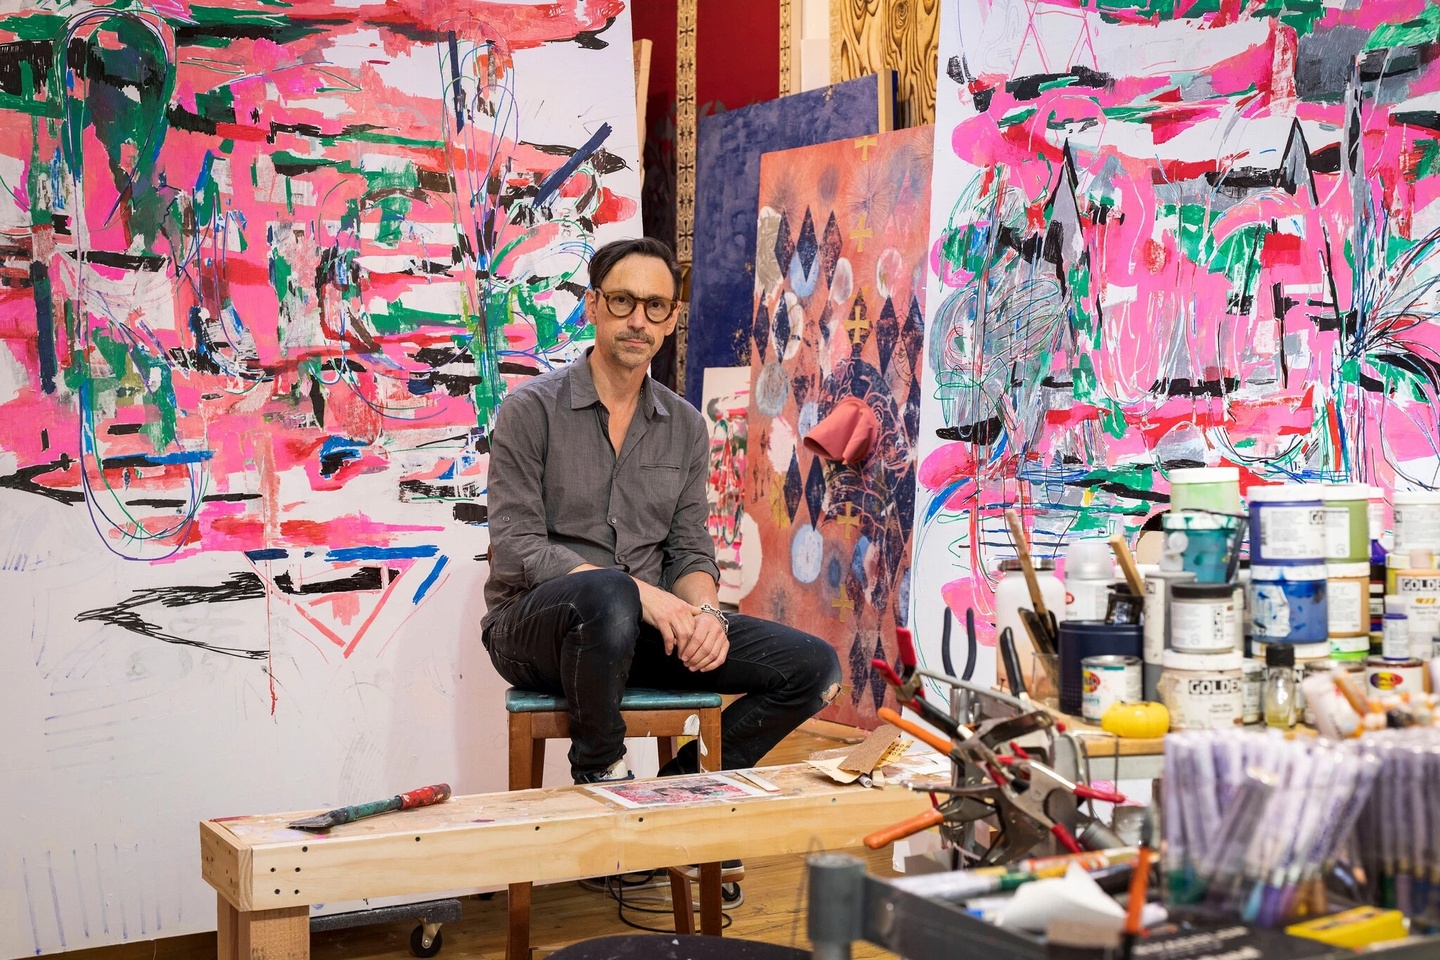 Portrait of Mark Fox in studio, with vibrant paintings on the walls behind him.